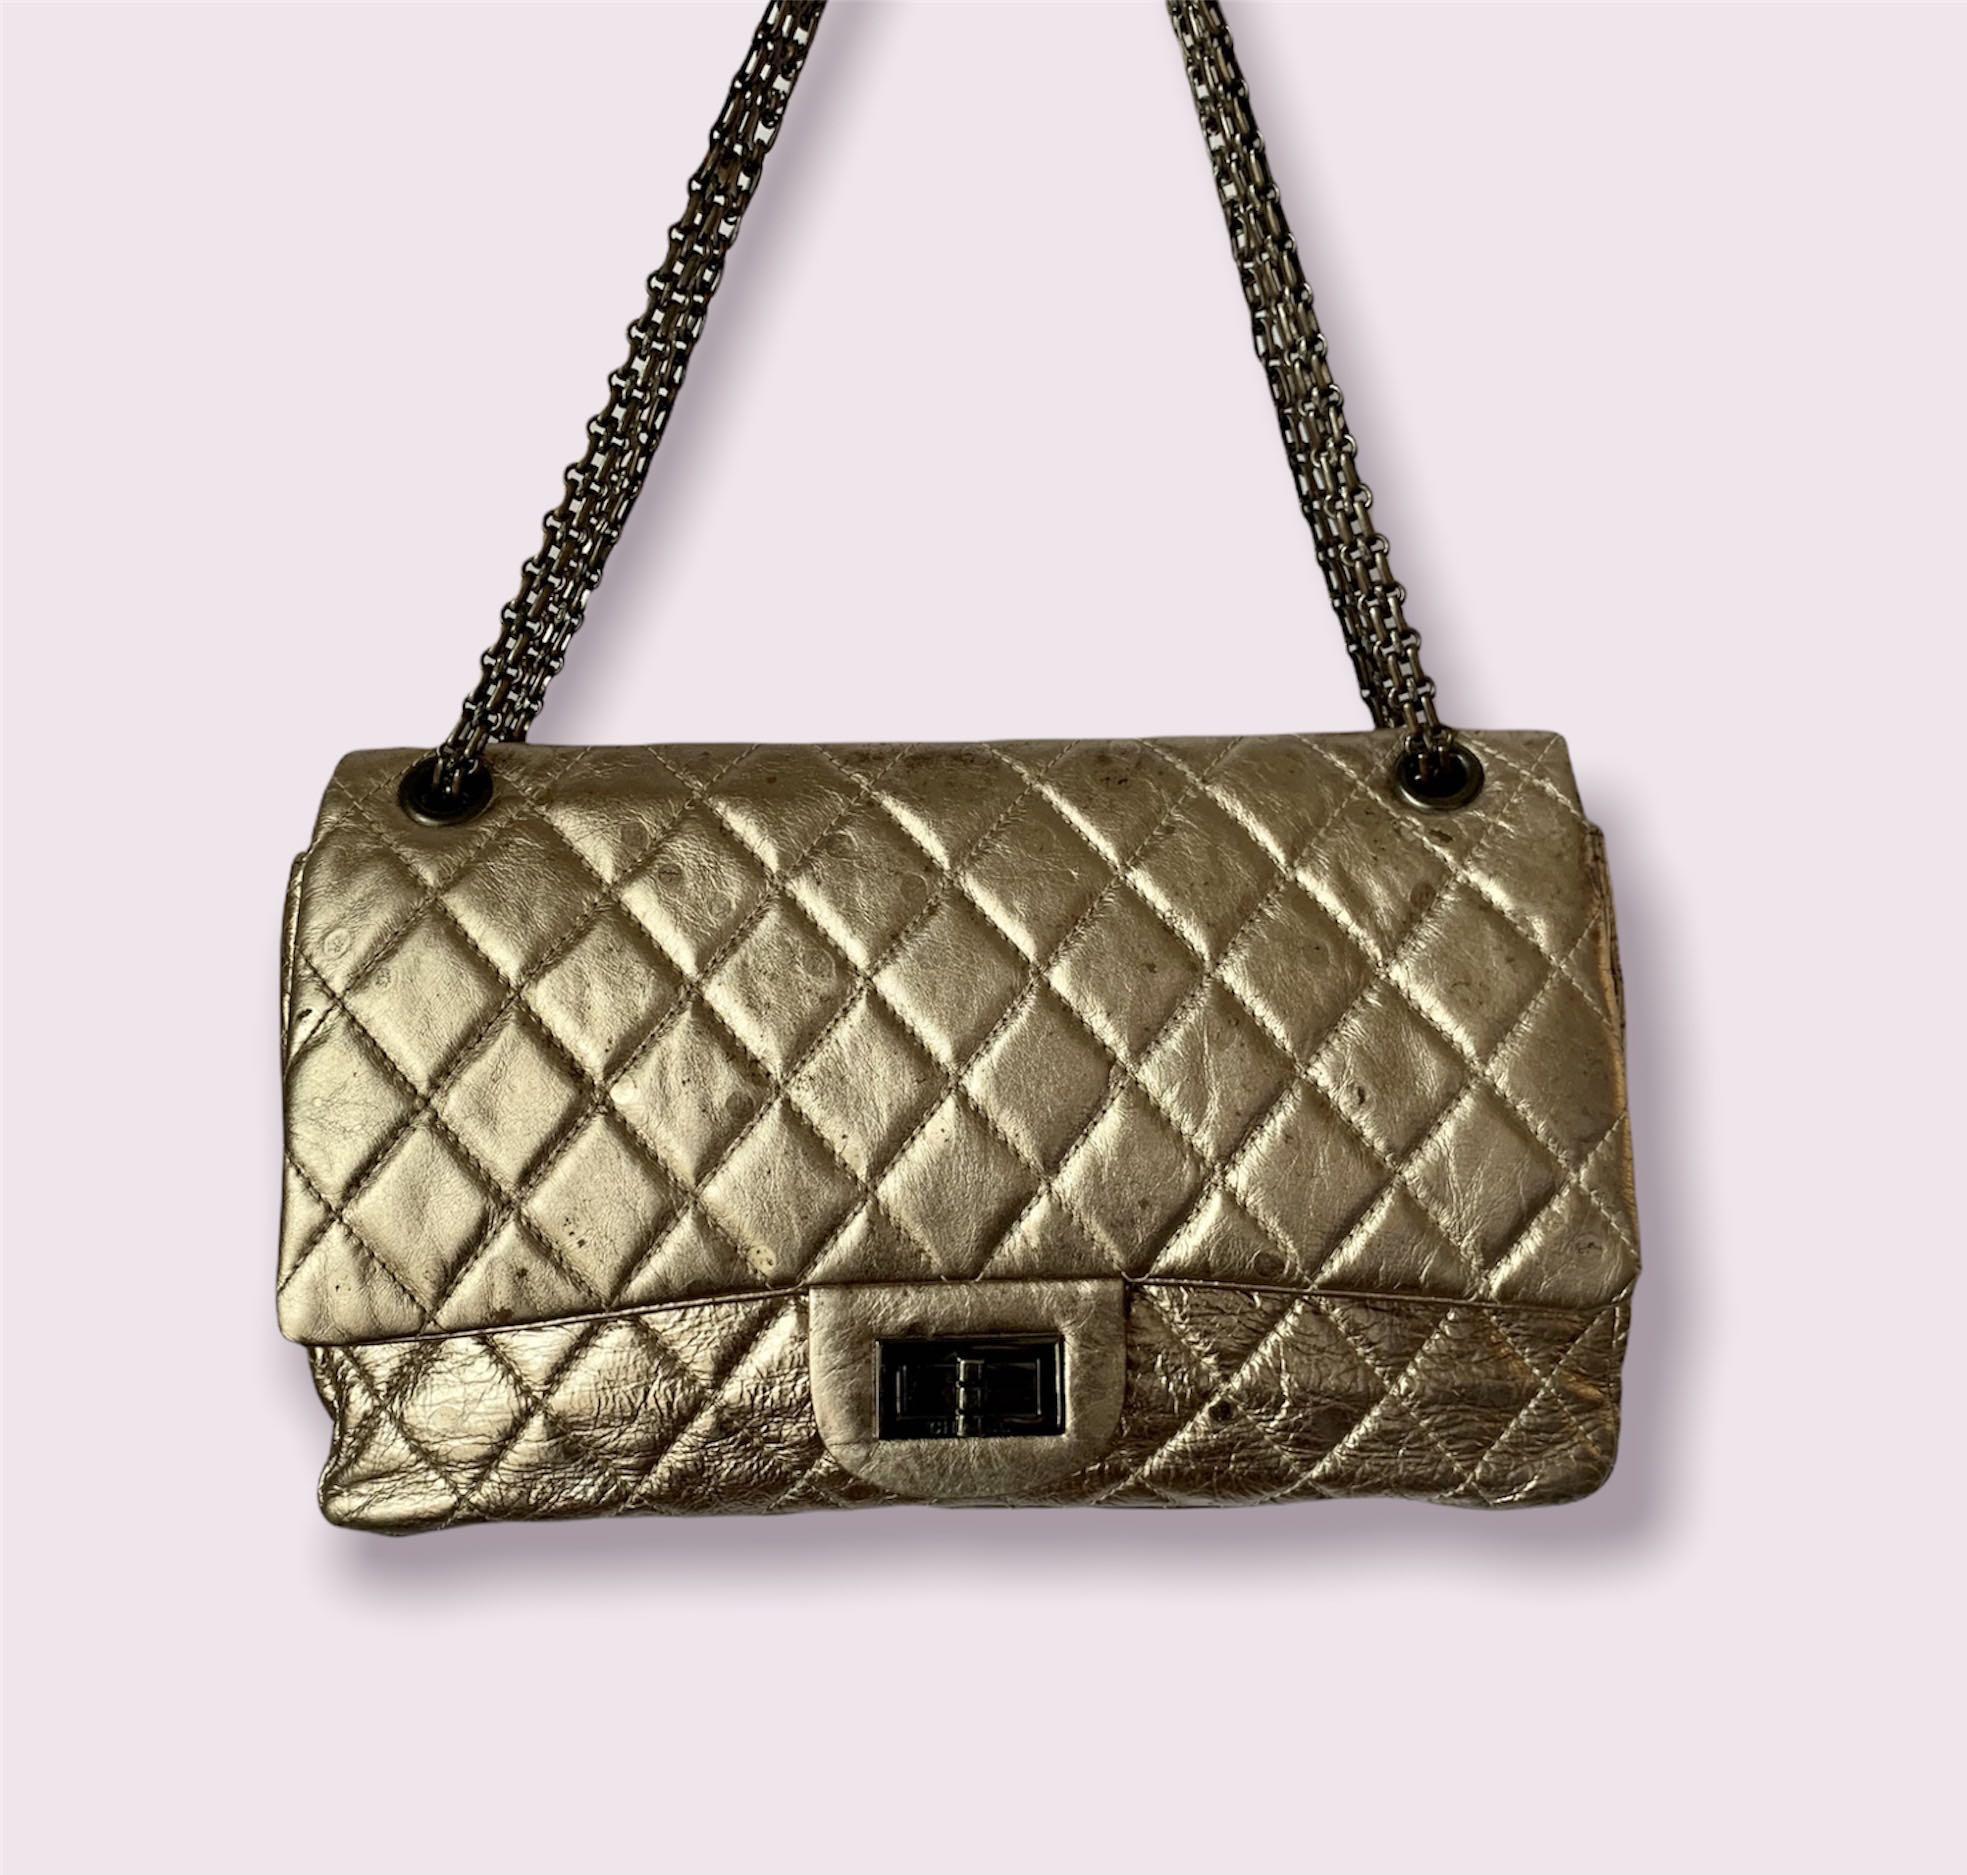 Chanel 2.55 Reissue 227 Shoulder Flap Bag Golden Metallic Raindrop Effect  Aged Calfskin Leather With Datecode Serial Number